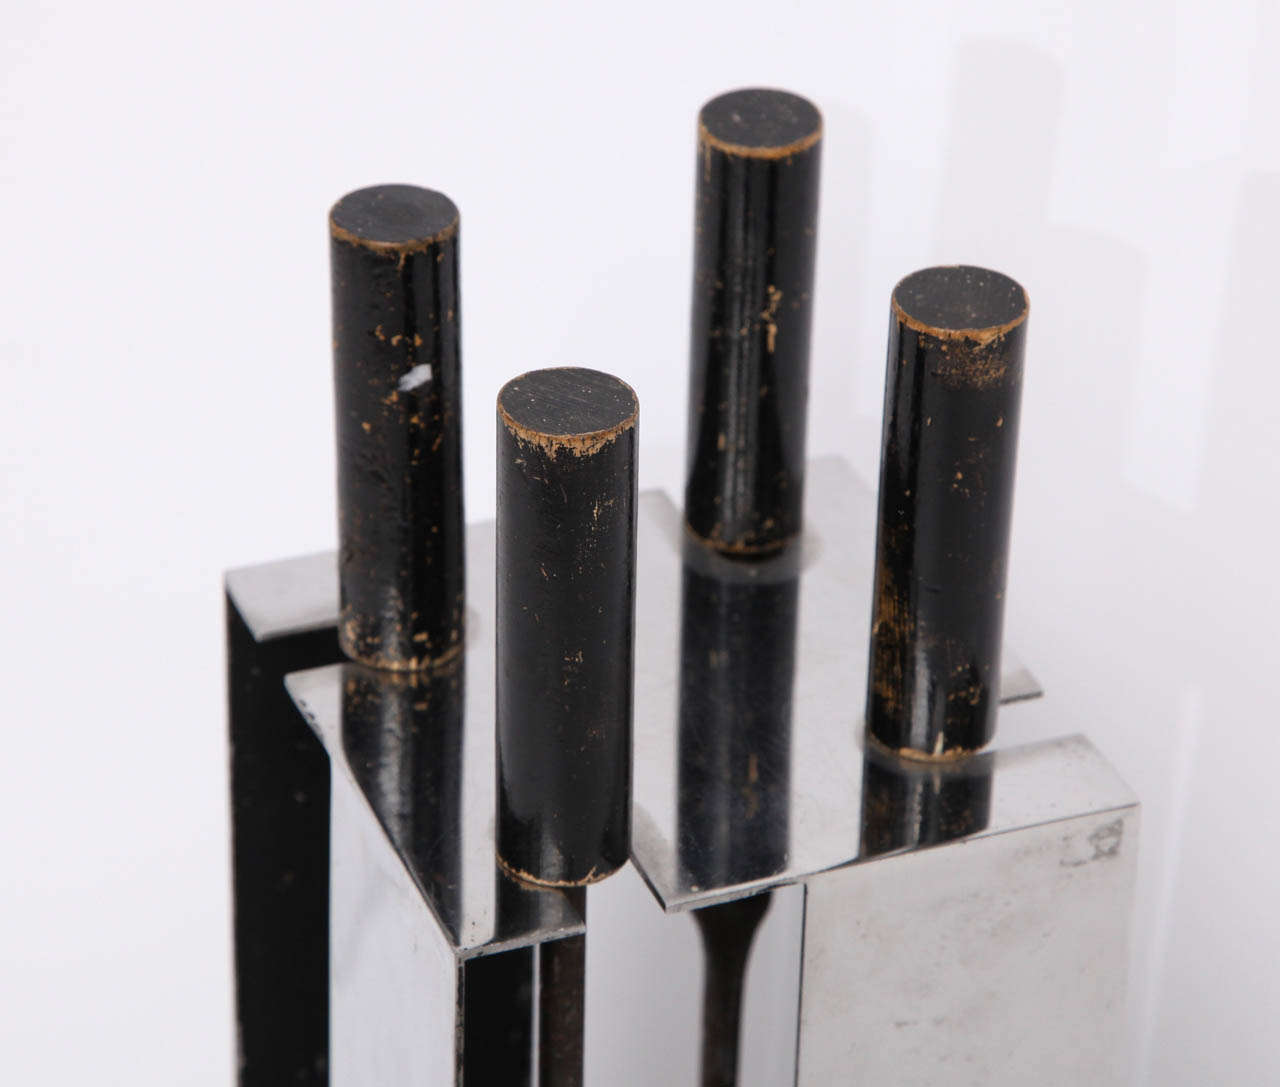 French Modernist set of fire place tools, France, c. 1930